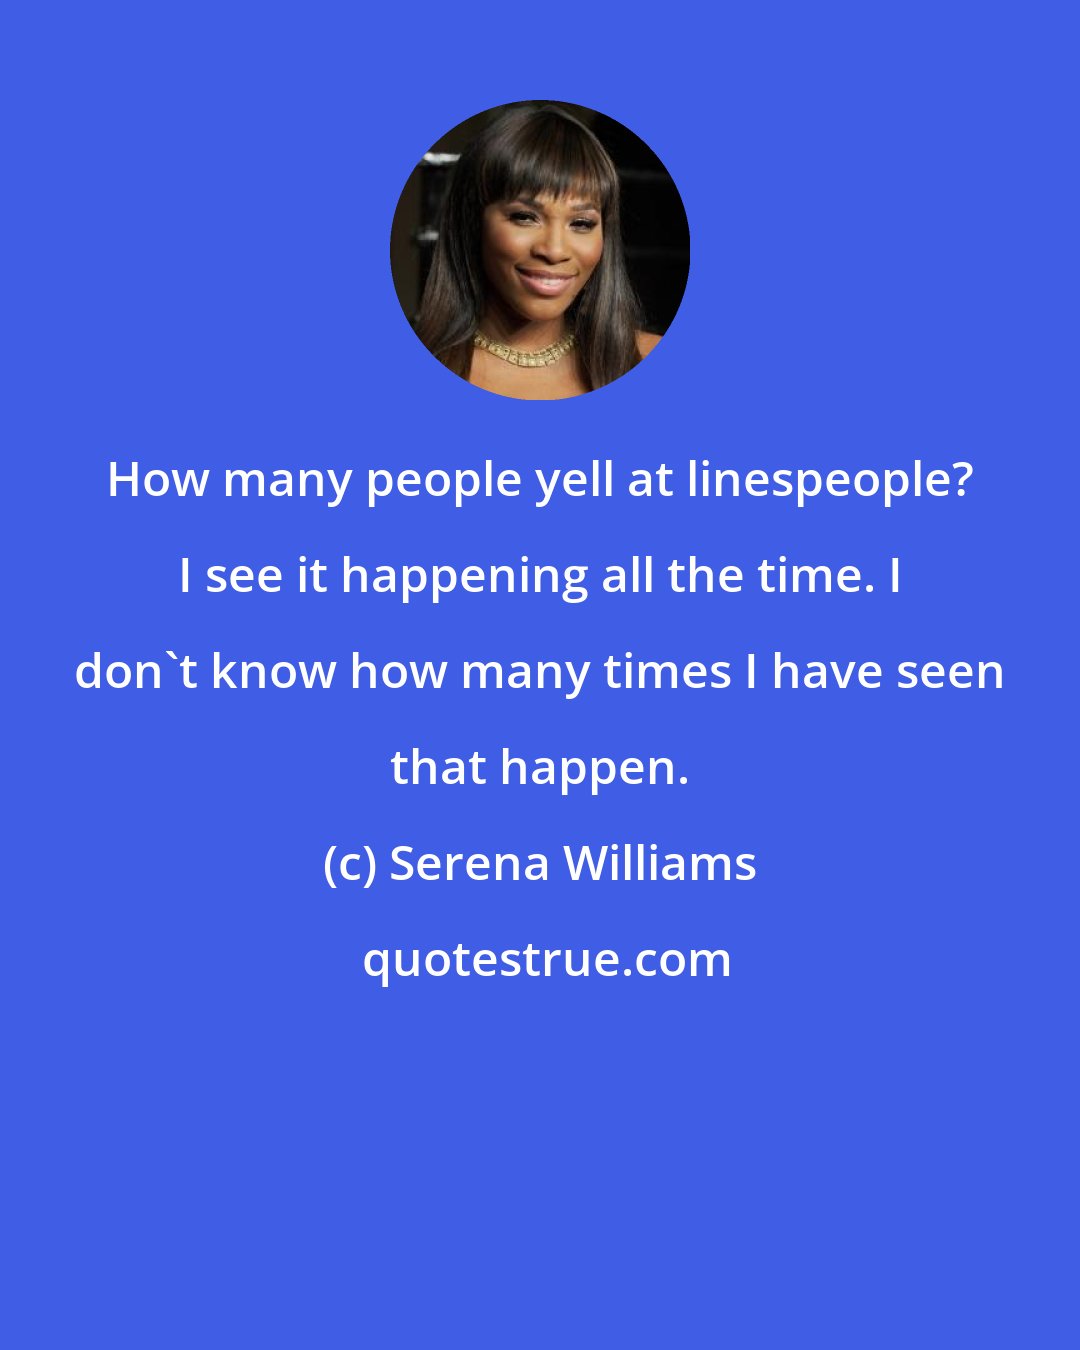 Serena Williams: How many people yell at linespeople? I see it happening all the time. I don't know how many times I have seen that happen.